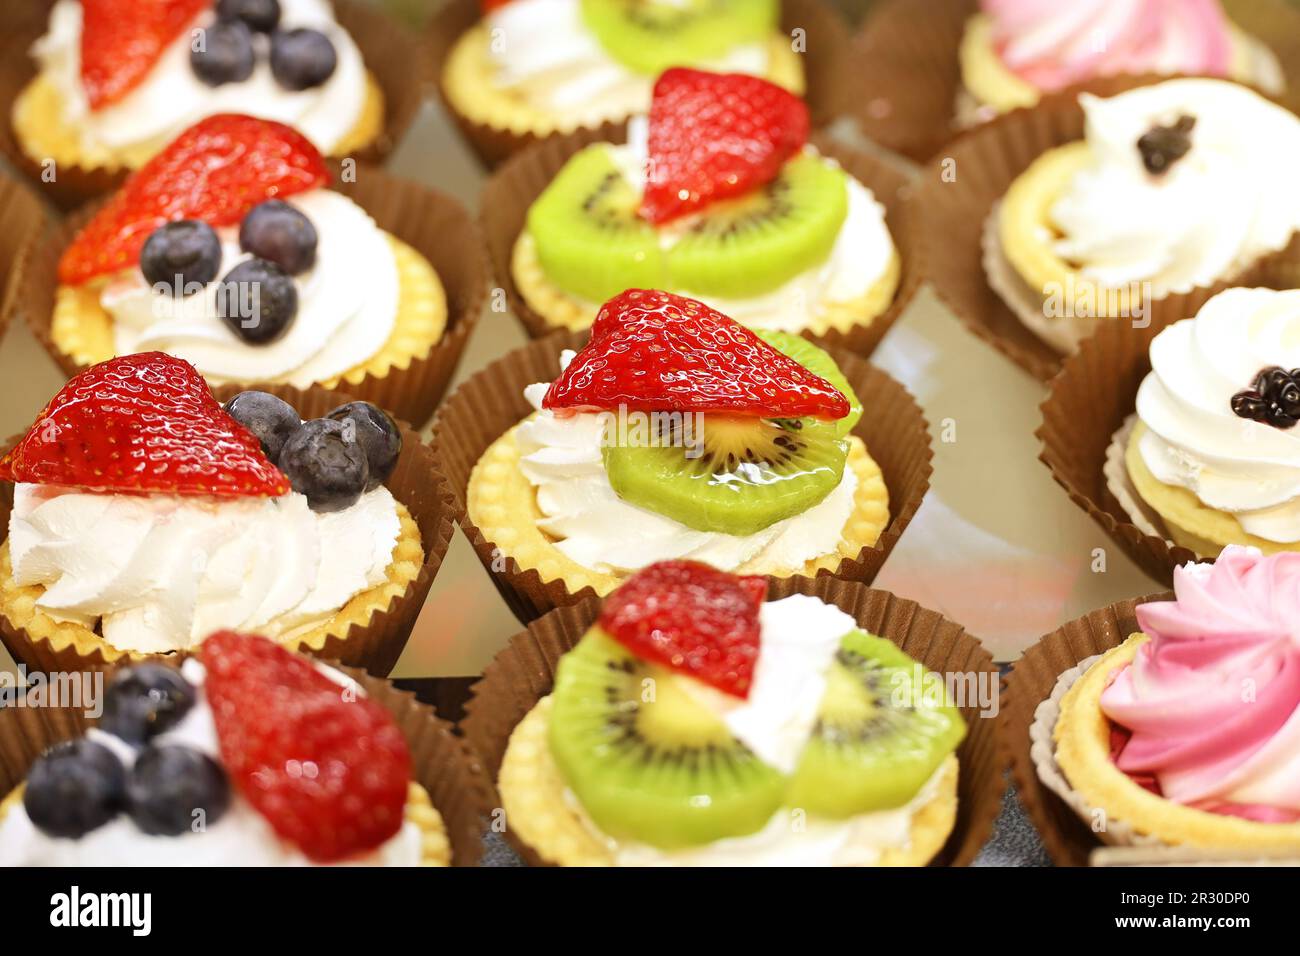 Cakes with fresh fruits and berries, selective focus. Sweet dessert with strawberry, kiwi and blueberries Stock Photo